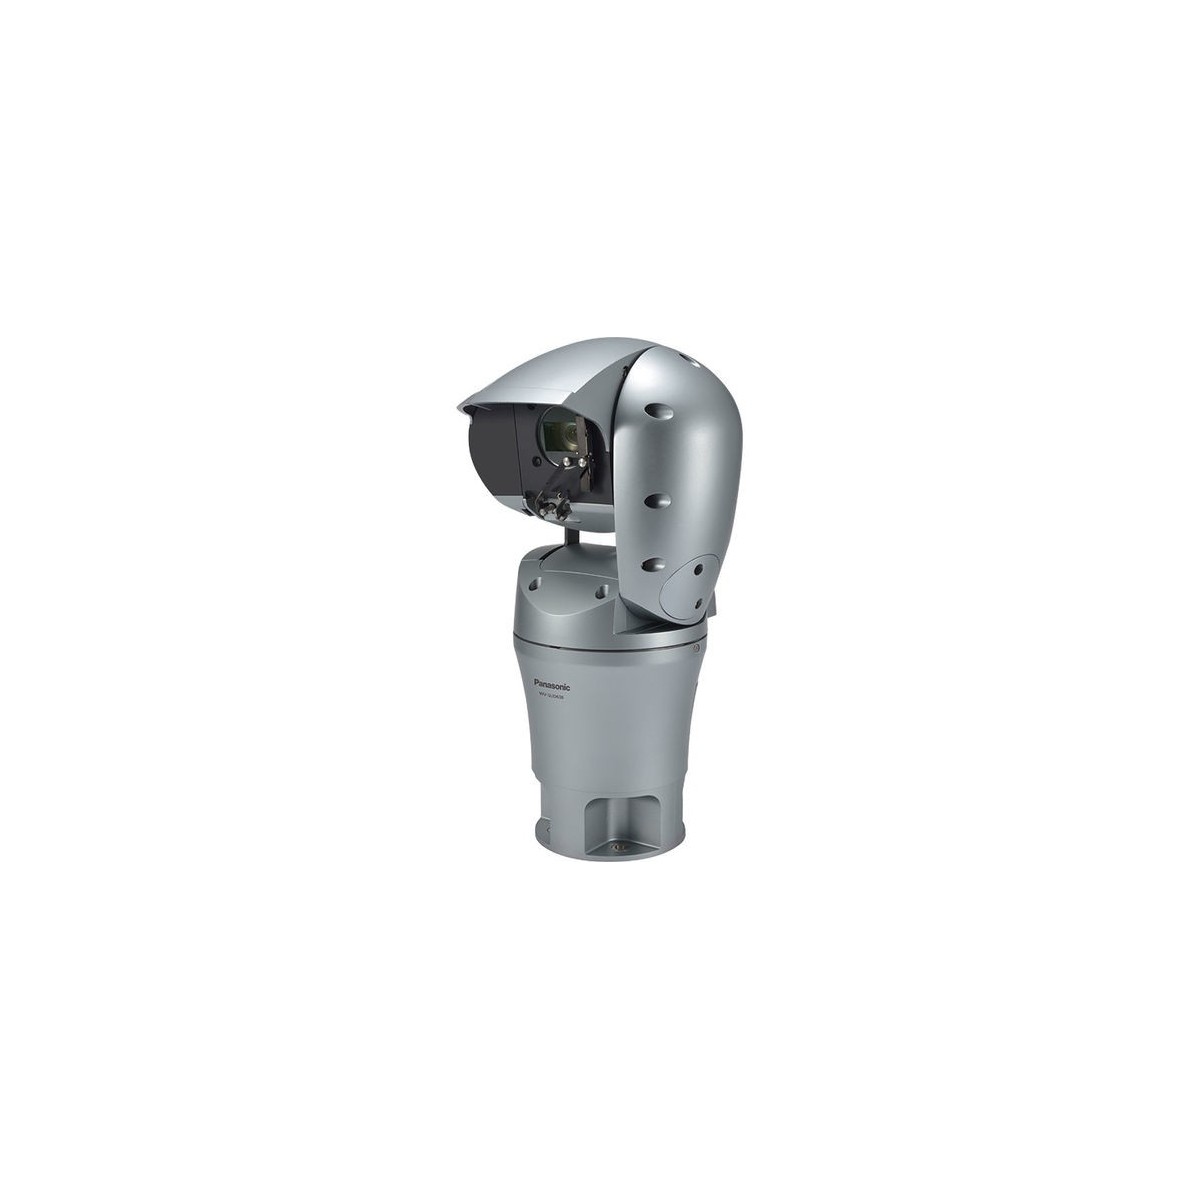 Panasonic WV-SUD638 - IP security camera - Indoor  outdoor - Wired - Ceiling-Desk - Silver - Dust resistant,Water resistant